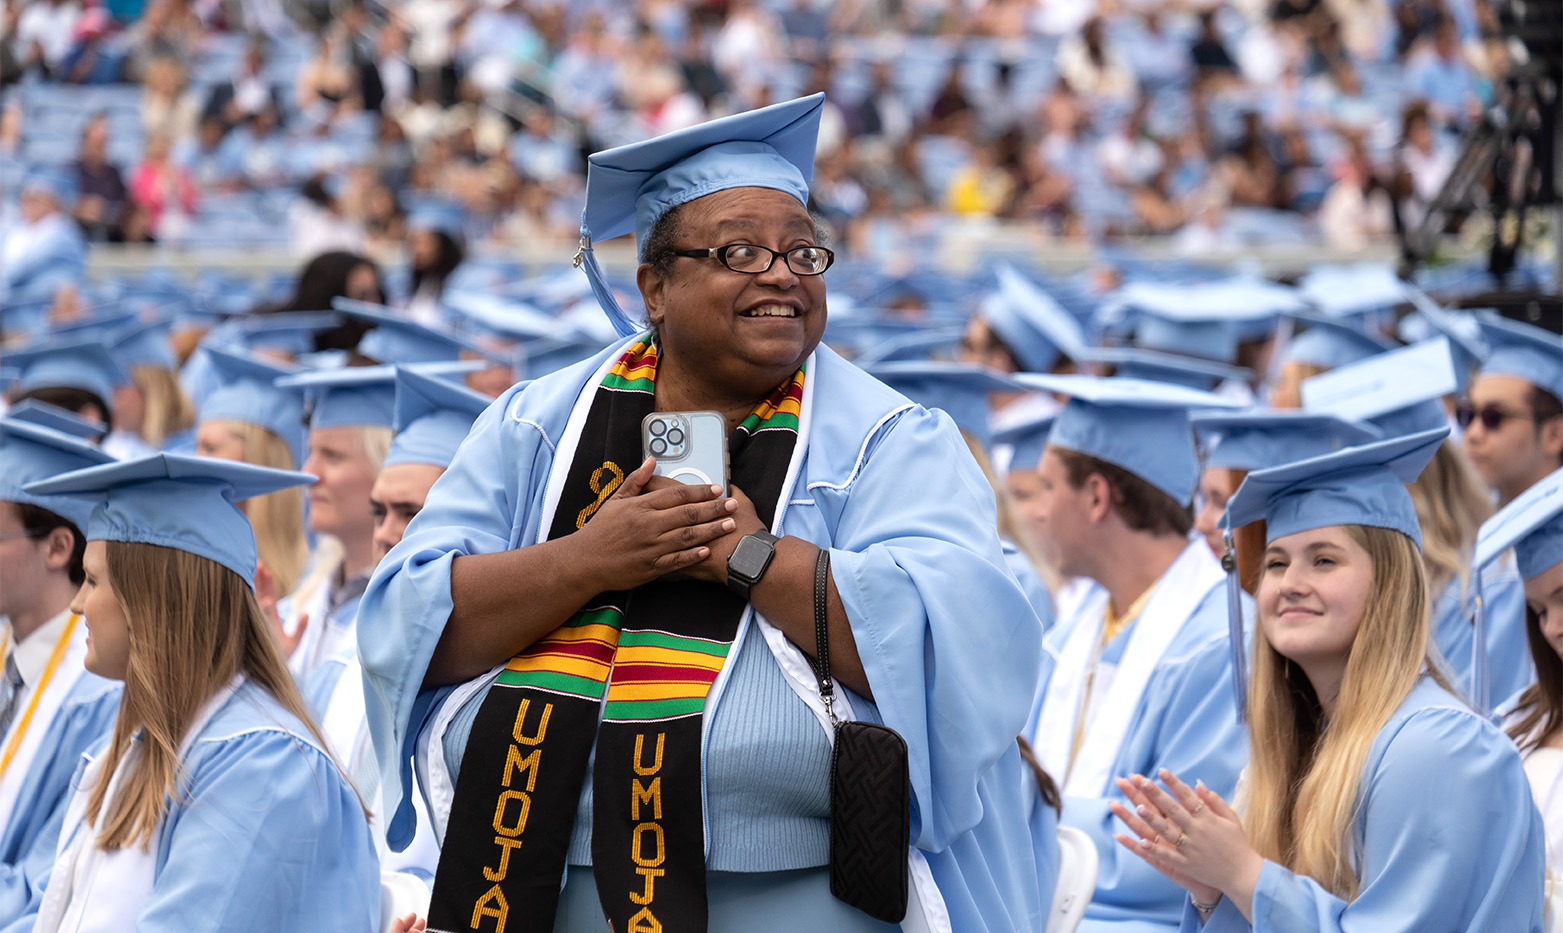 A graduate standing at commencement.